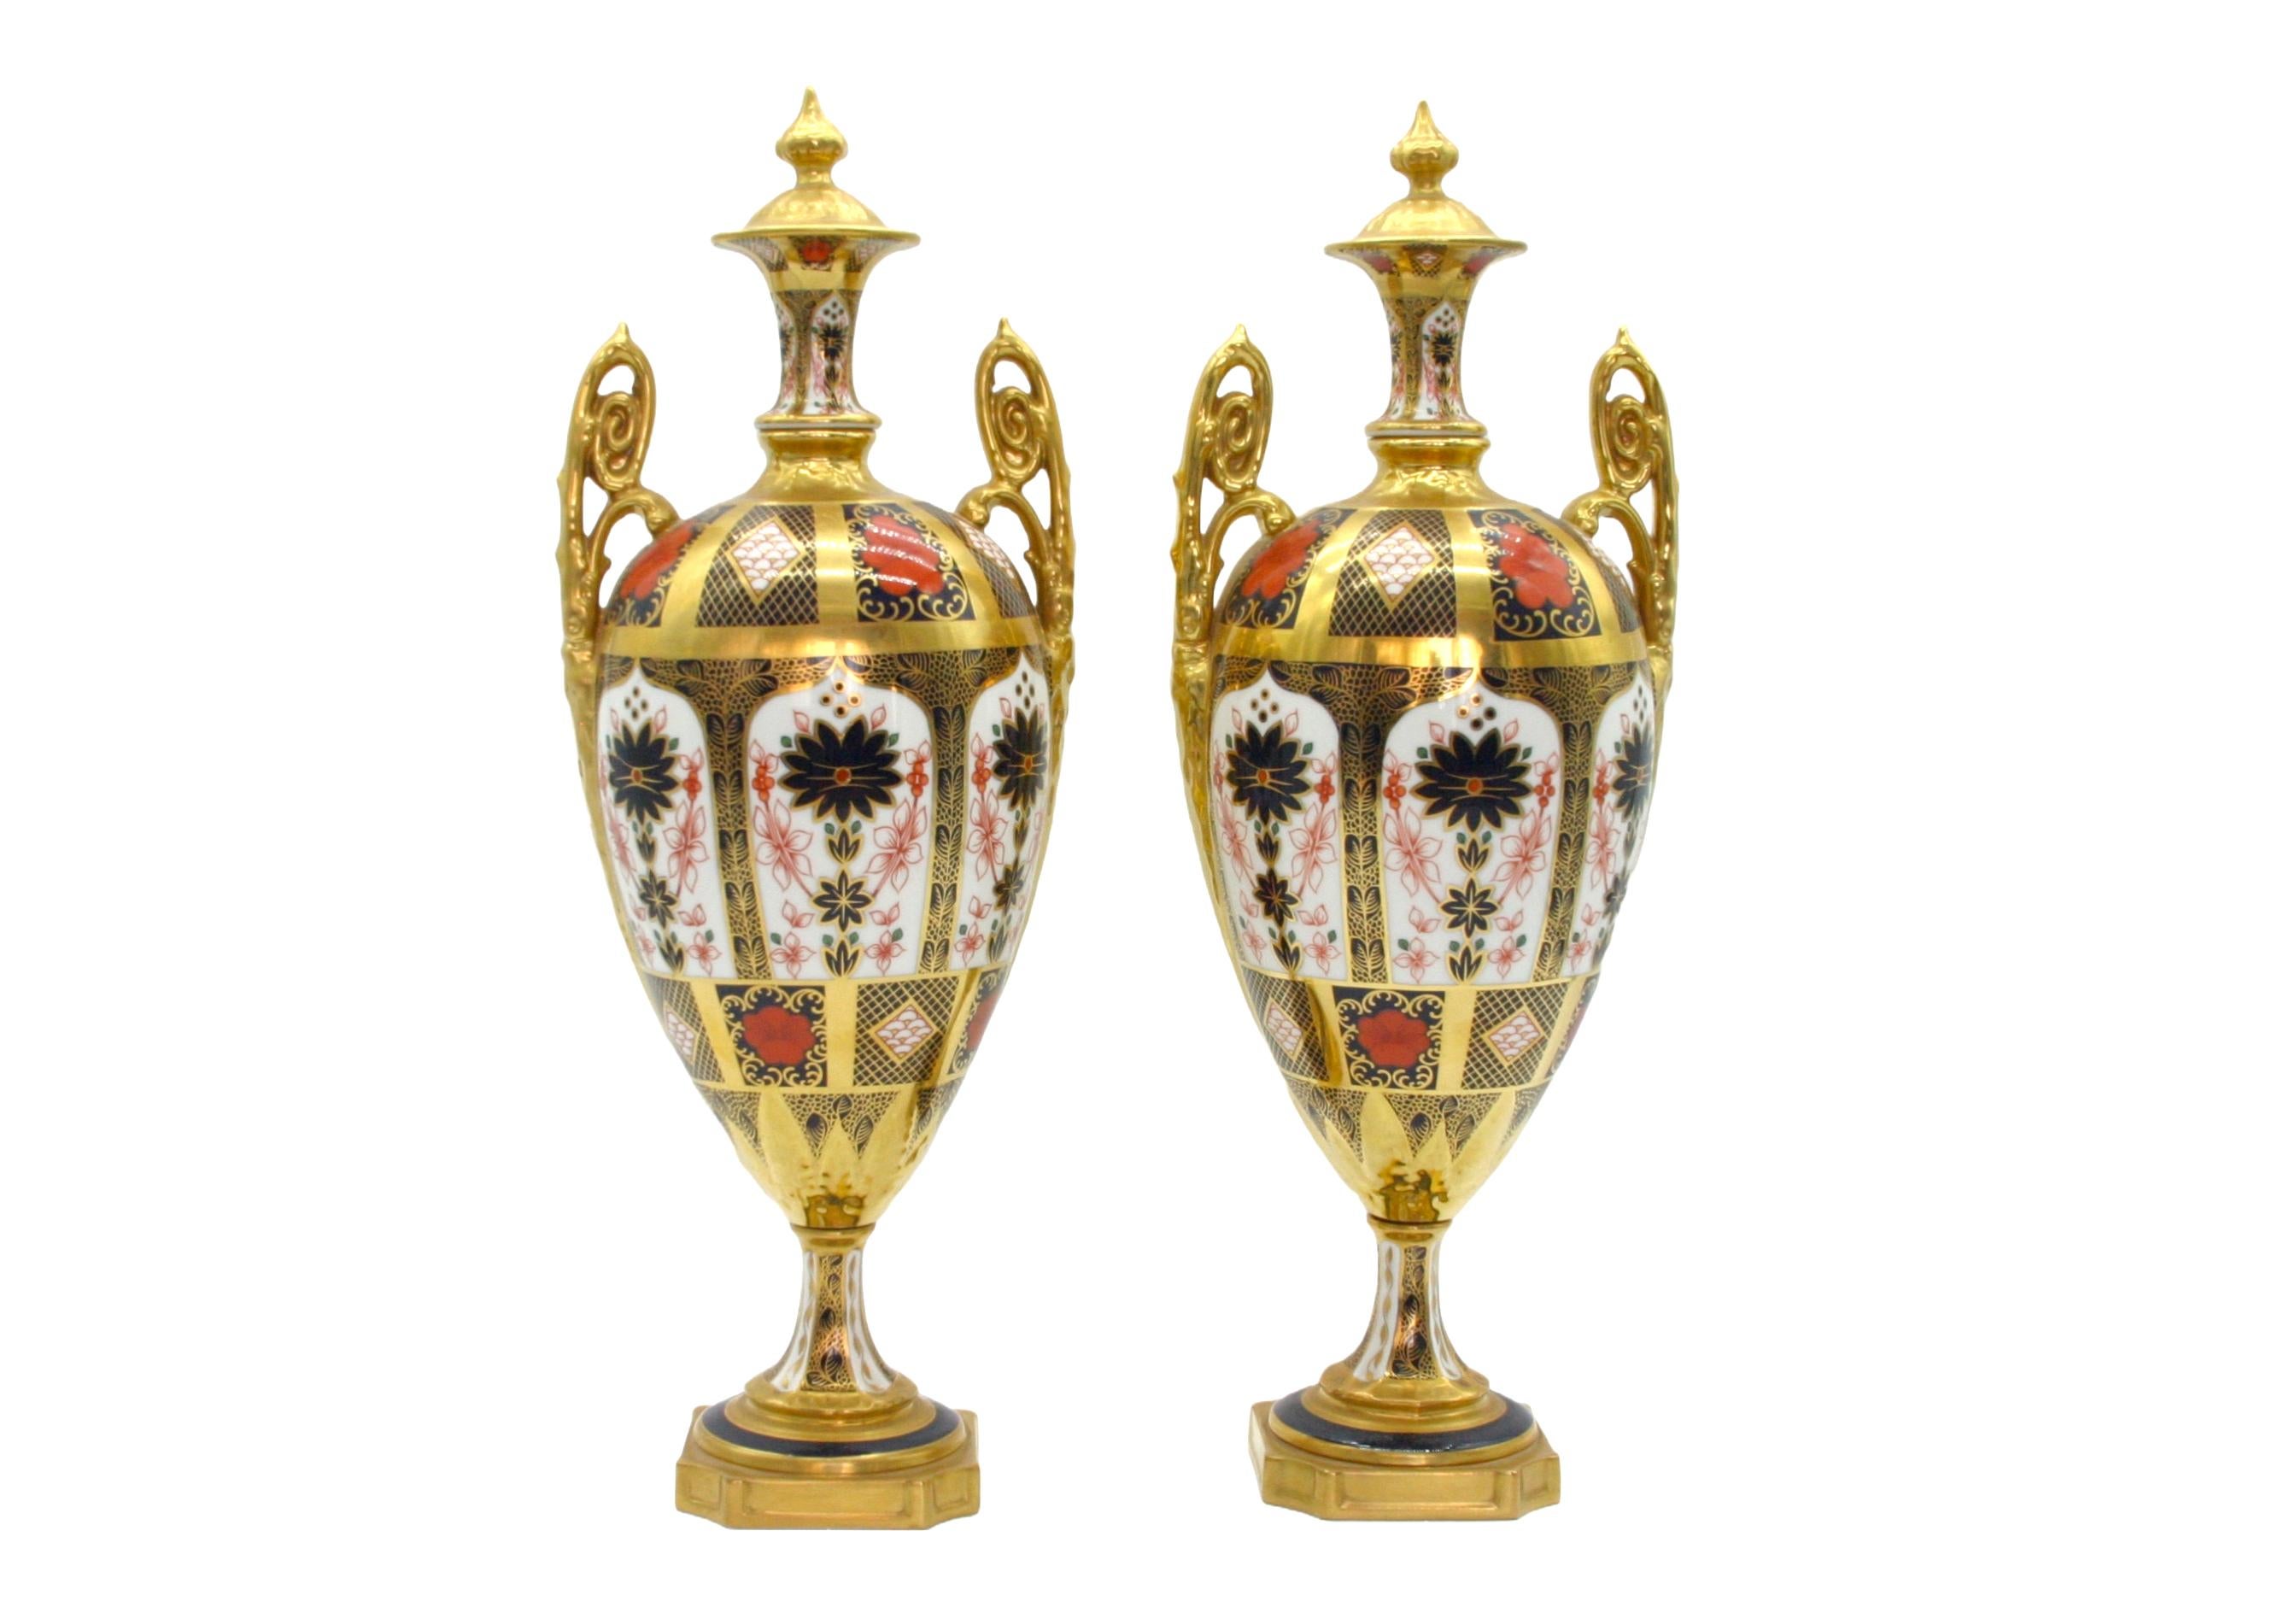 Beautifully gilt and hand painted Royal Crown Derby pair Imari pattern porcelain decorative urns/vases with gilt twin side handles. Each urn features an exterior 22k gold and handpainted details with an attached gilt gold cover and raised on